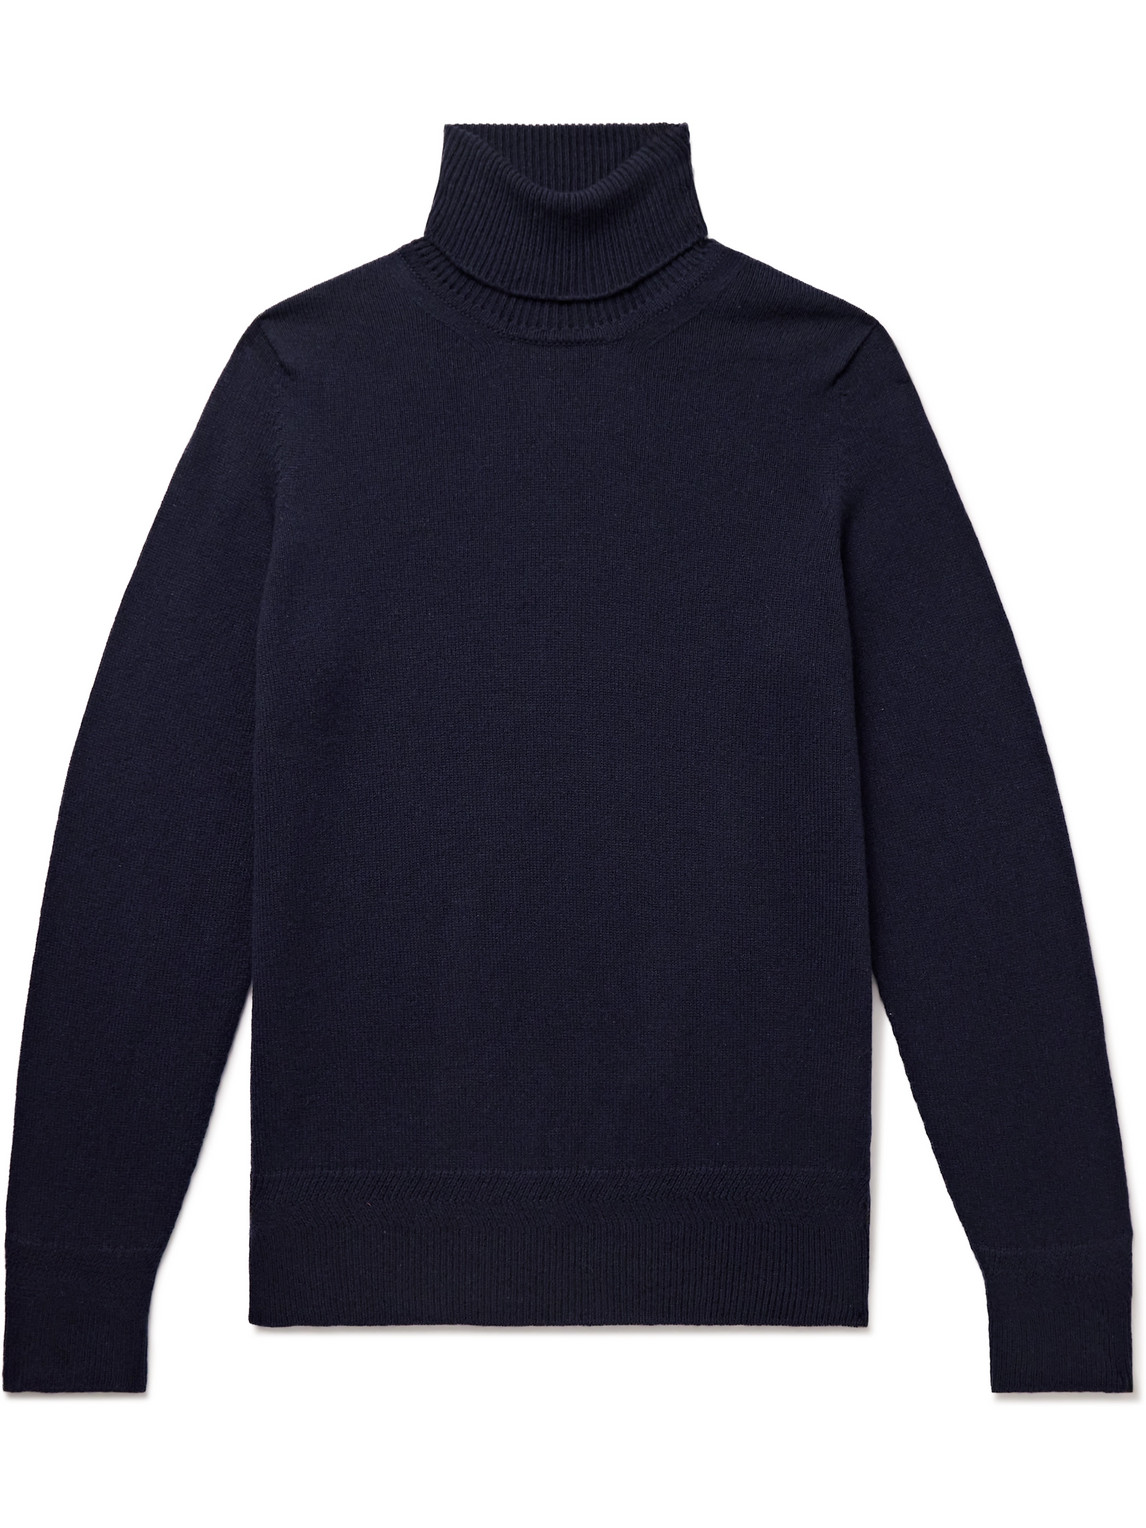 Kolton Slim-Fit Recycled-Cashmere and Merino Wool-Blend Rollneck Sweater